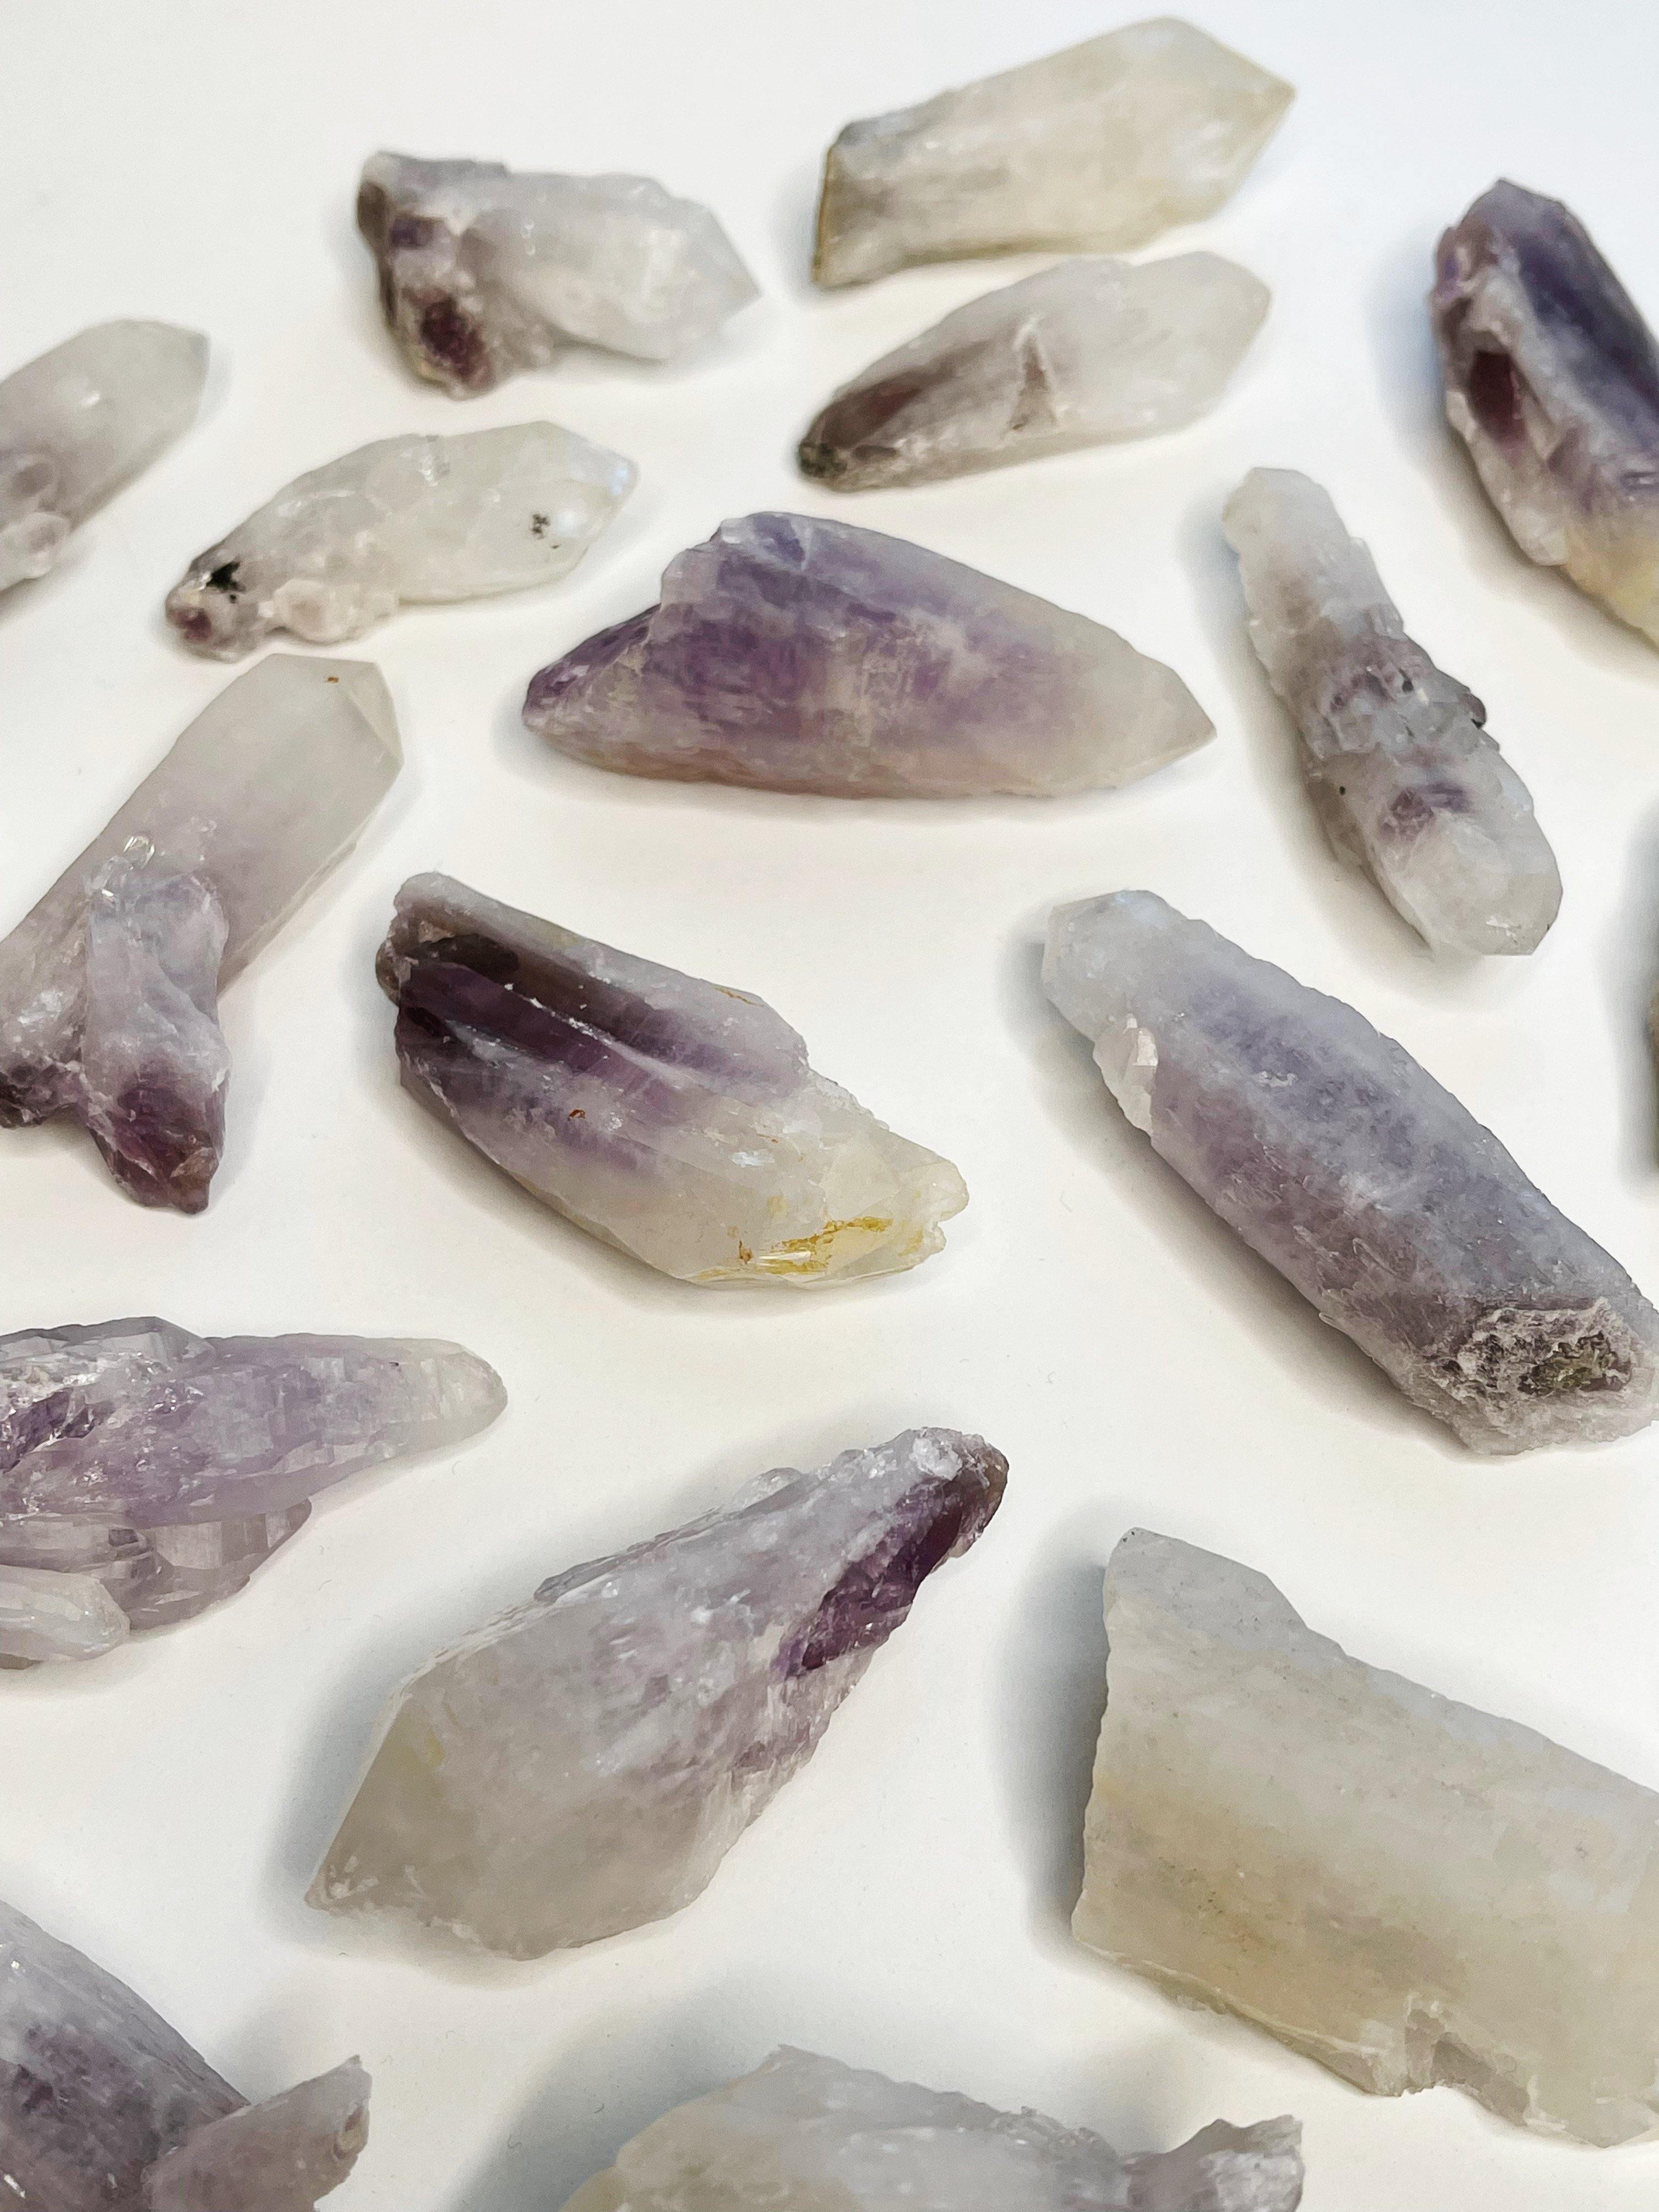 ZEN AMETHYST - RAW - 33 bday, 444 sale, amethyst, emotional support, grief gift bundle, holiday sale, raw crystal, raw stone, rough stone, spring equinox, zen amethyst - The Mineral Maven